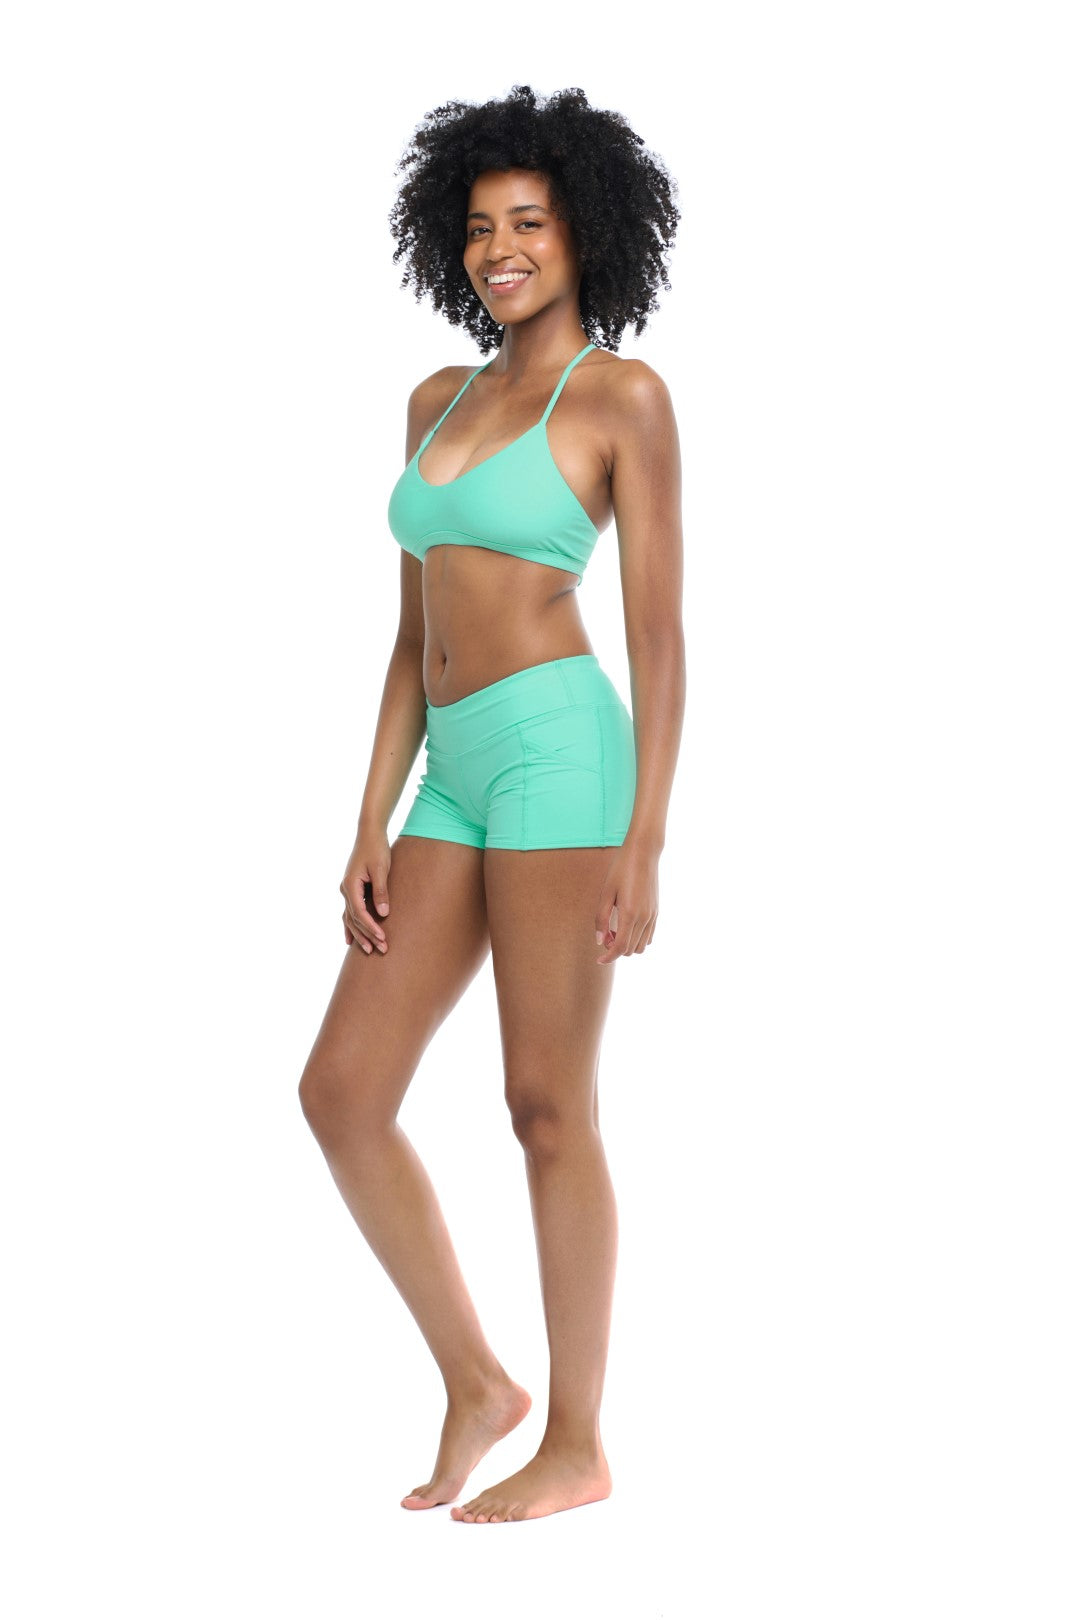 Ruth Body Glove Top in Turquoise color